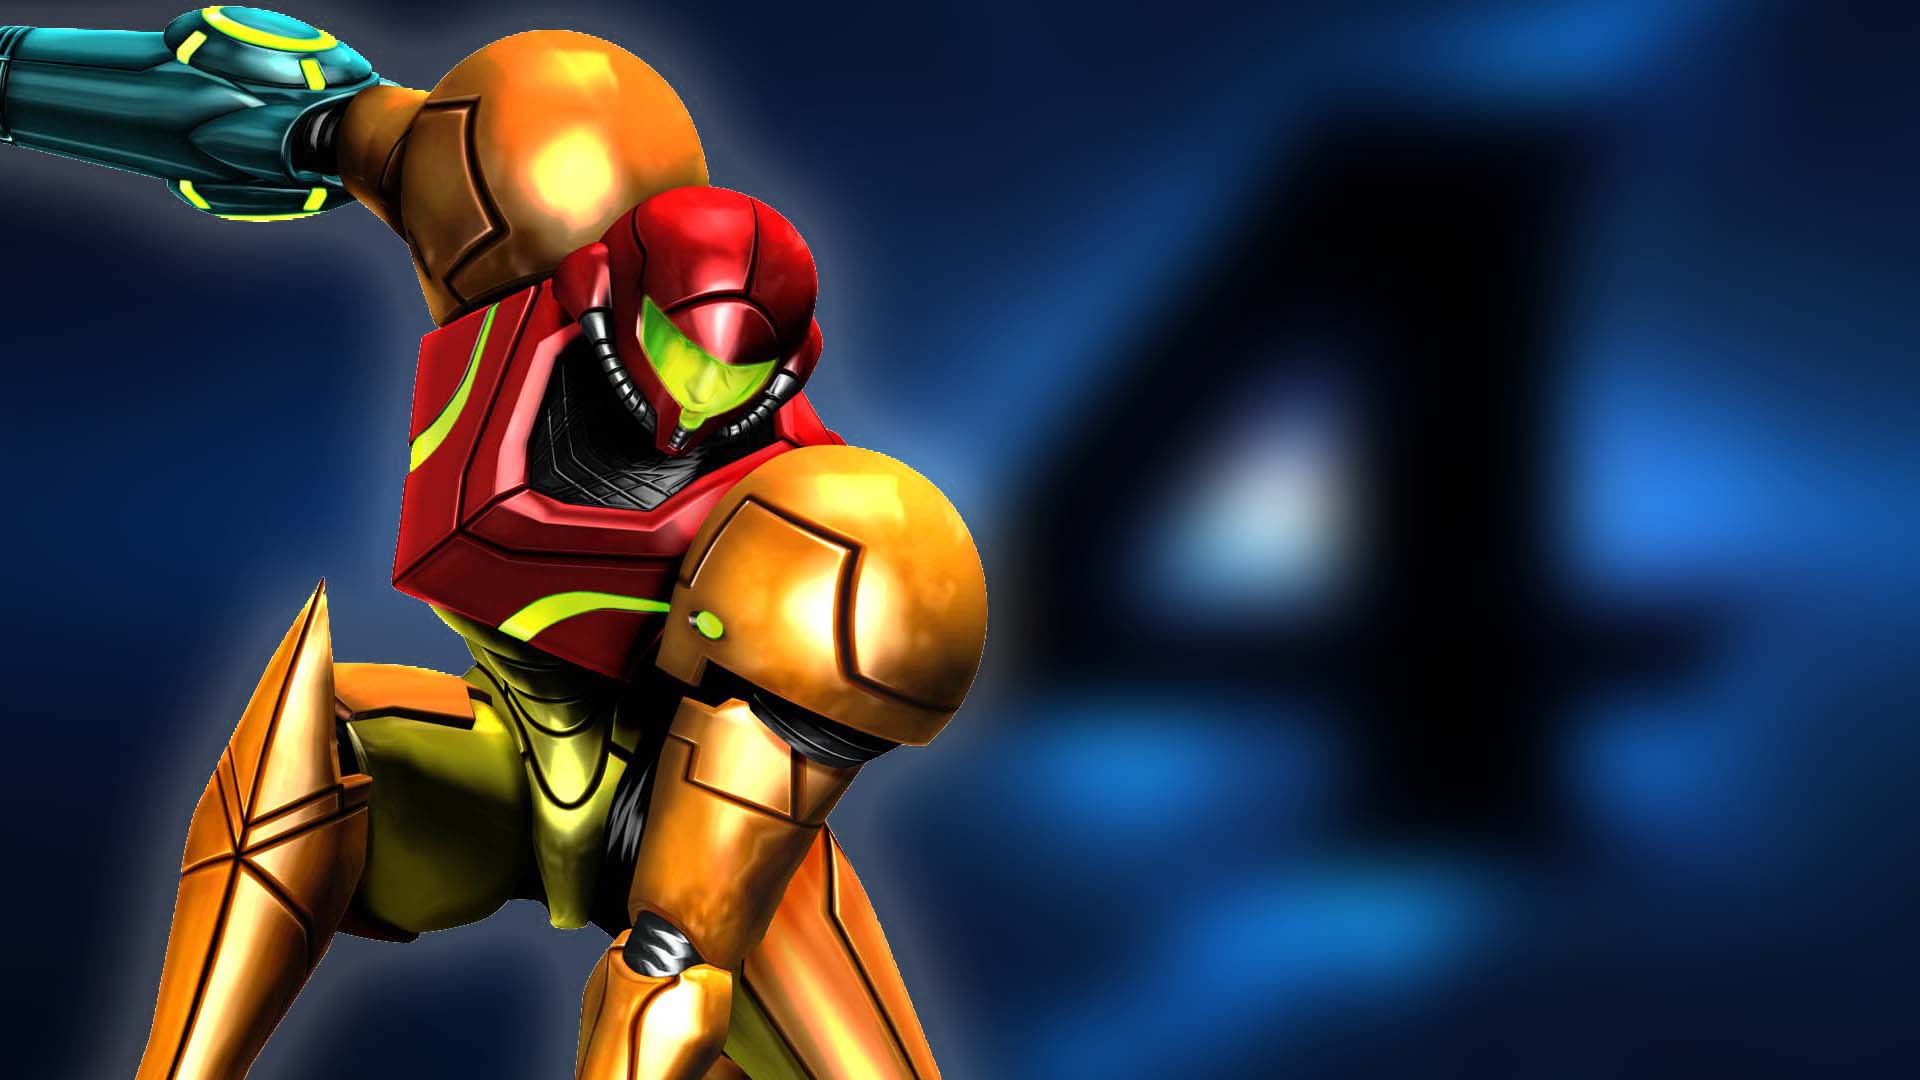 It’s now been six years since Metroid Prime 4 was announced – let’s ...